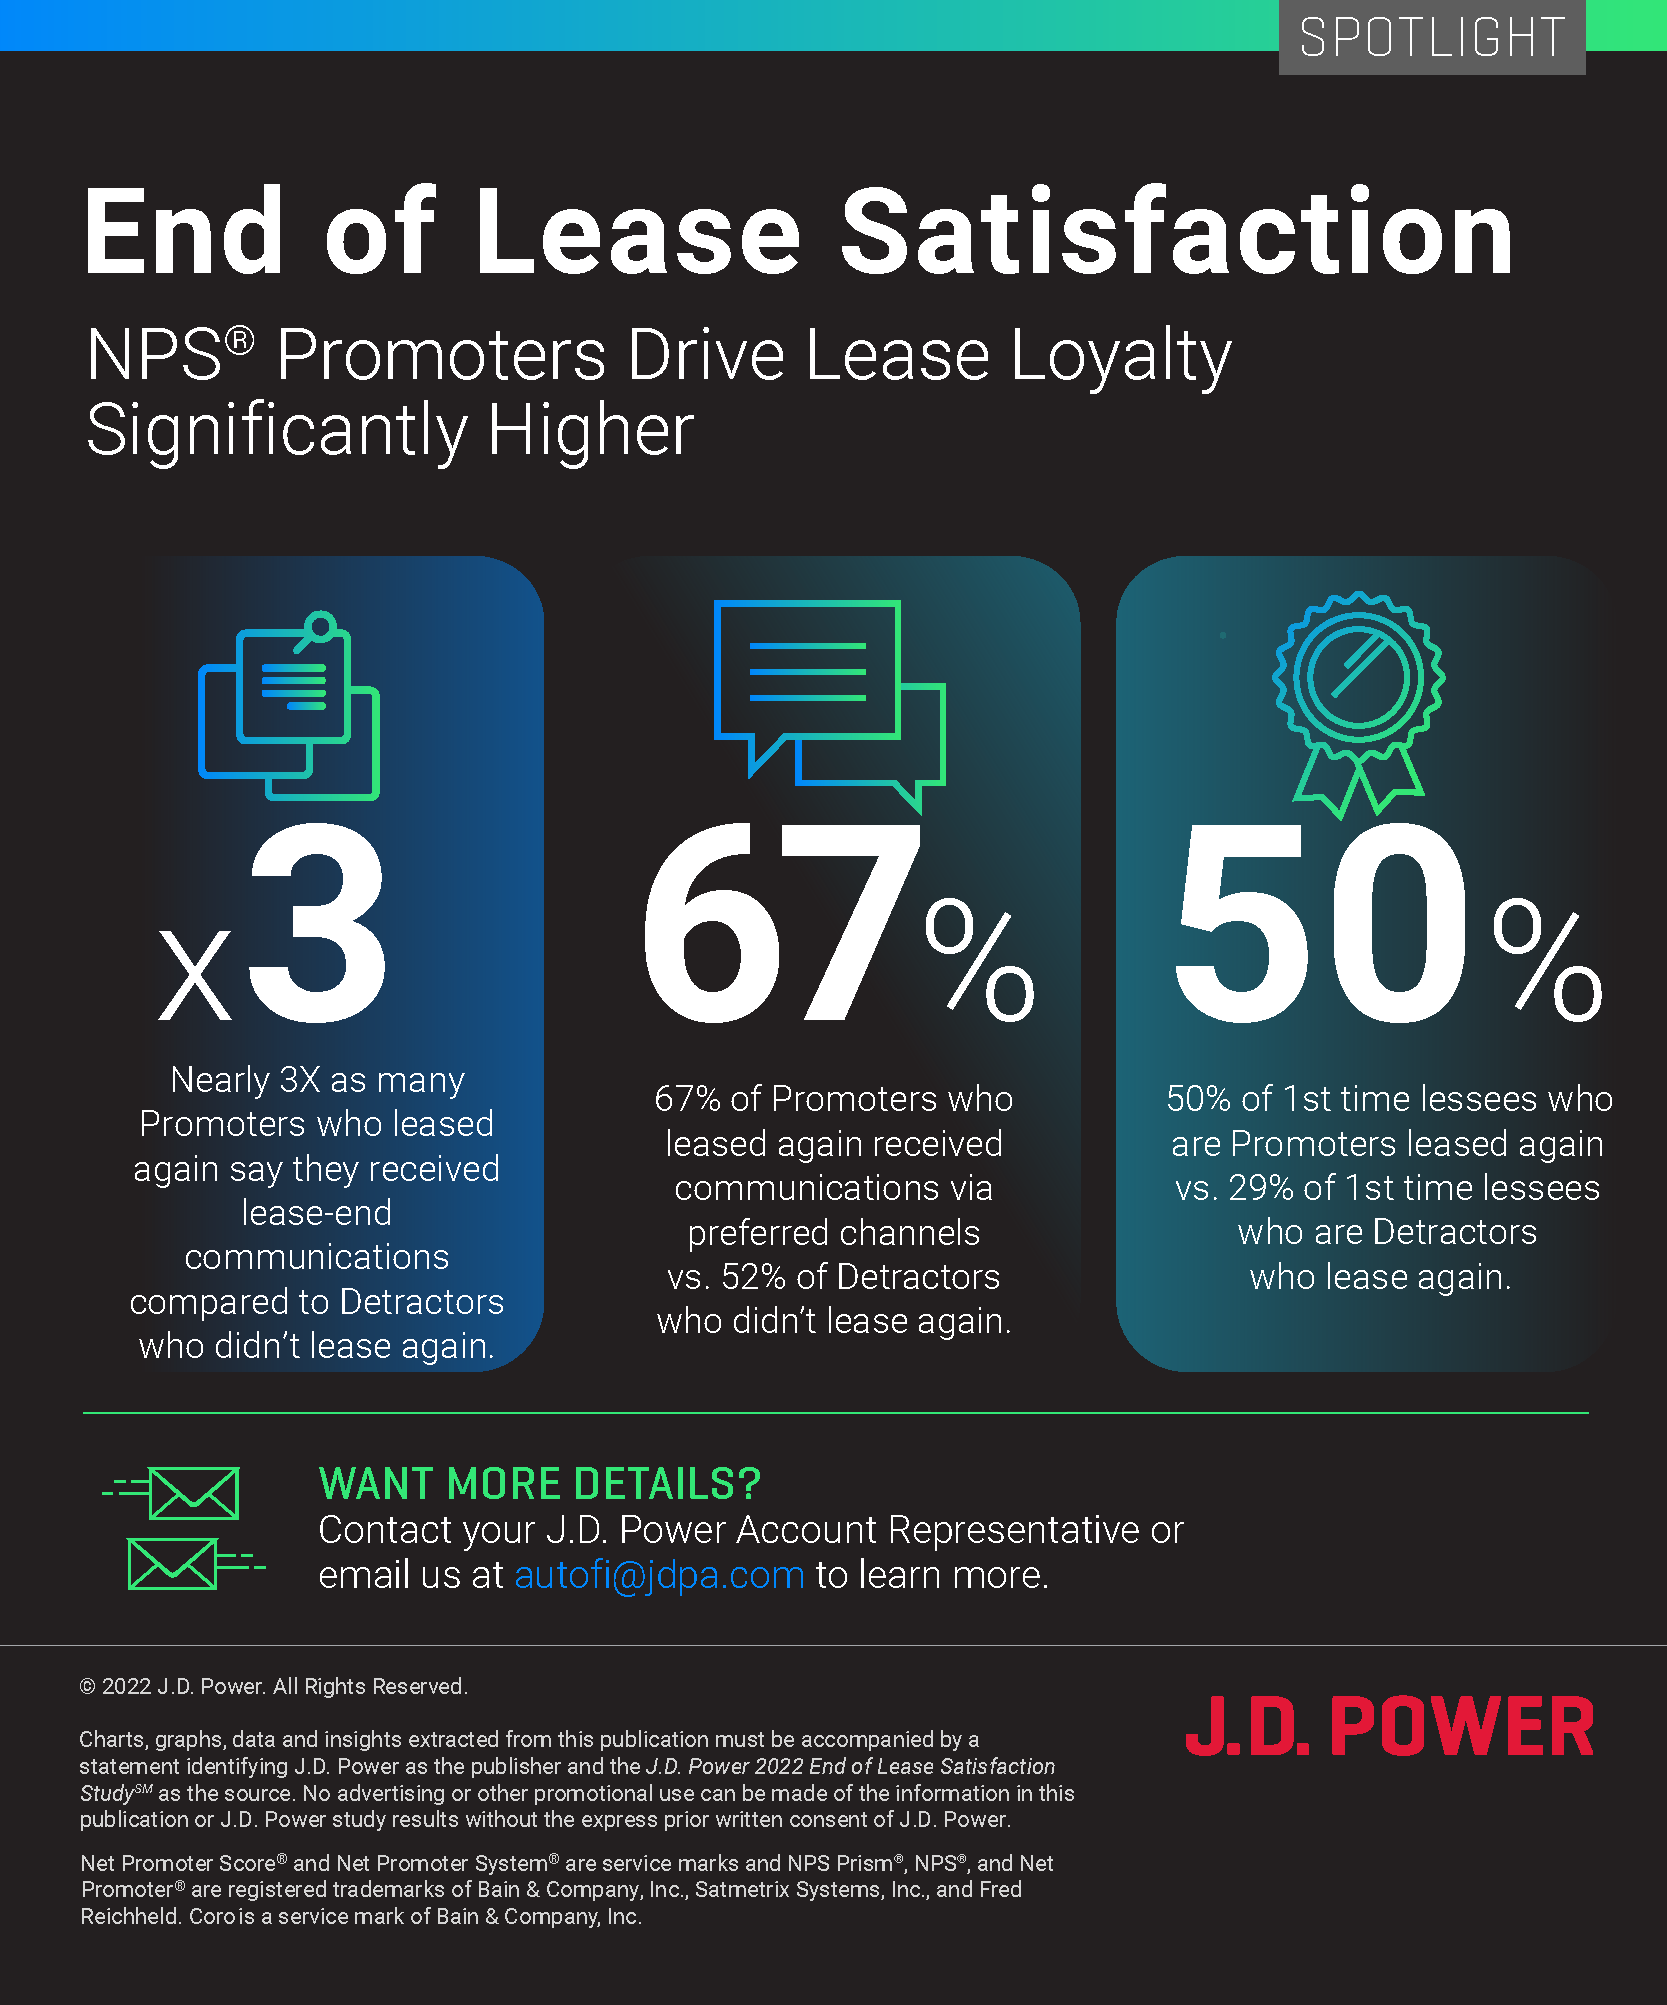 NPS Promoters Drive Lease Loyalty Significantly Higher